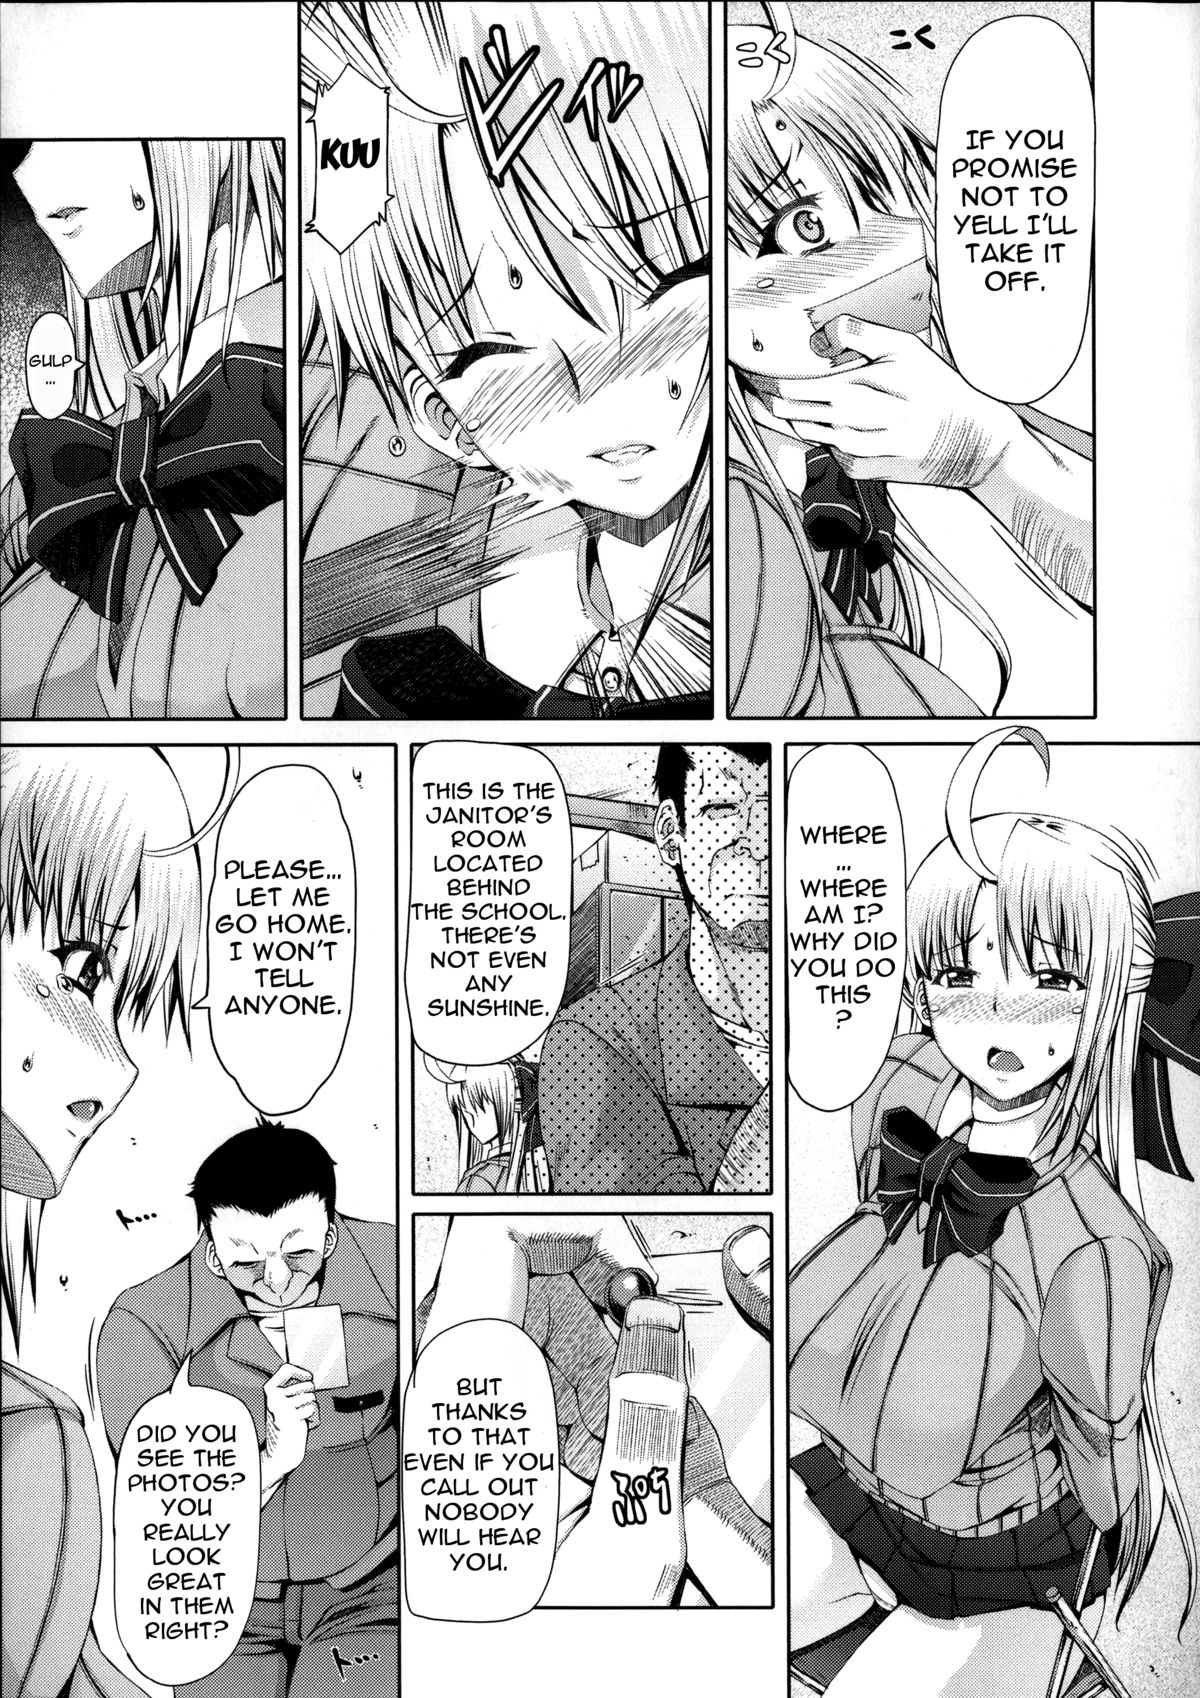 [RED-RUM] LOVE&PEACH Ch. 0-2 [English] {doujin-moe.us} page 32 full